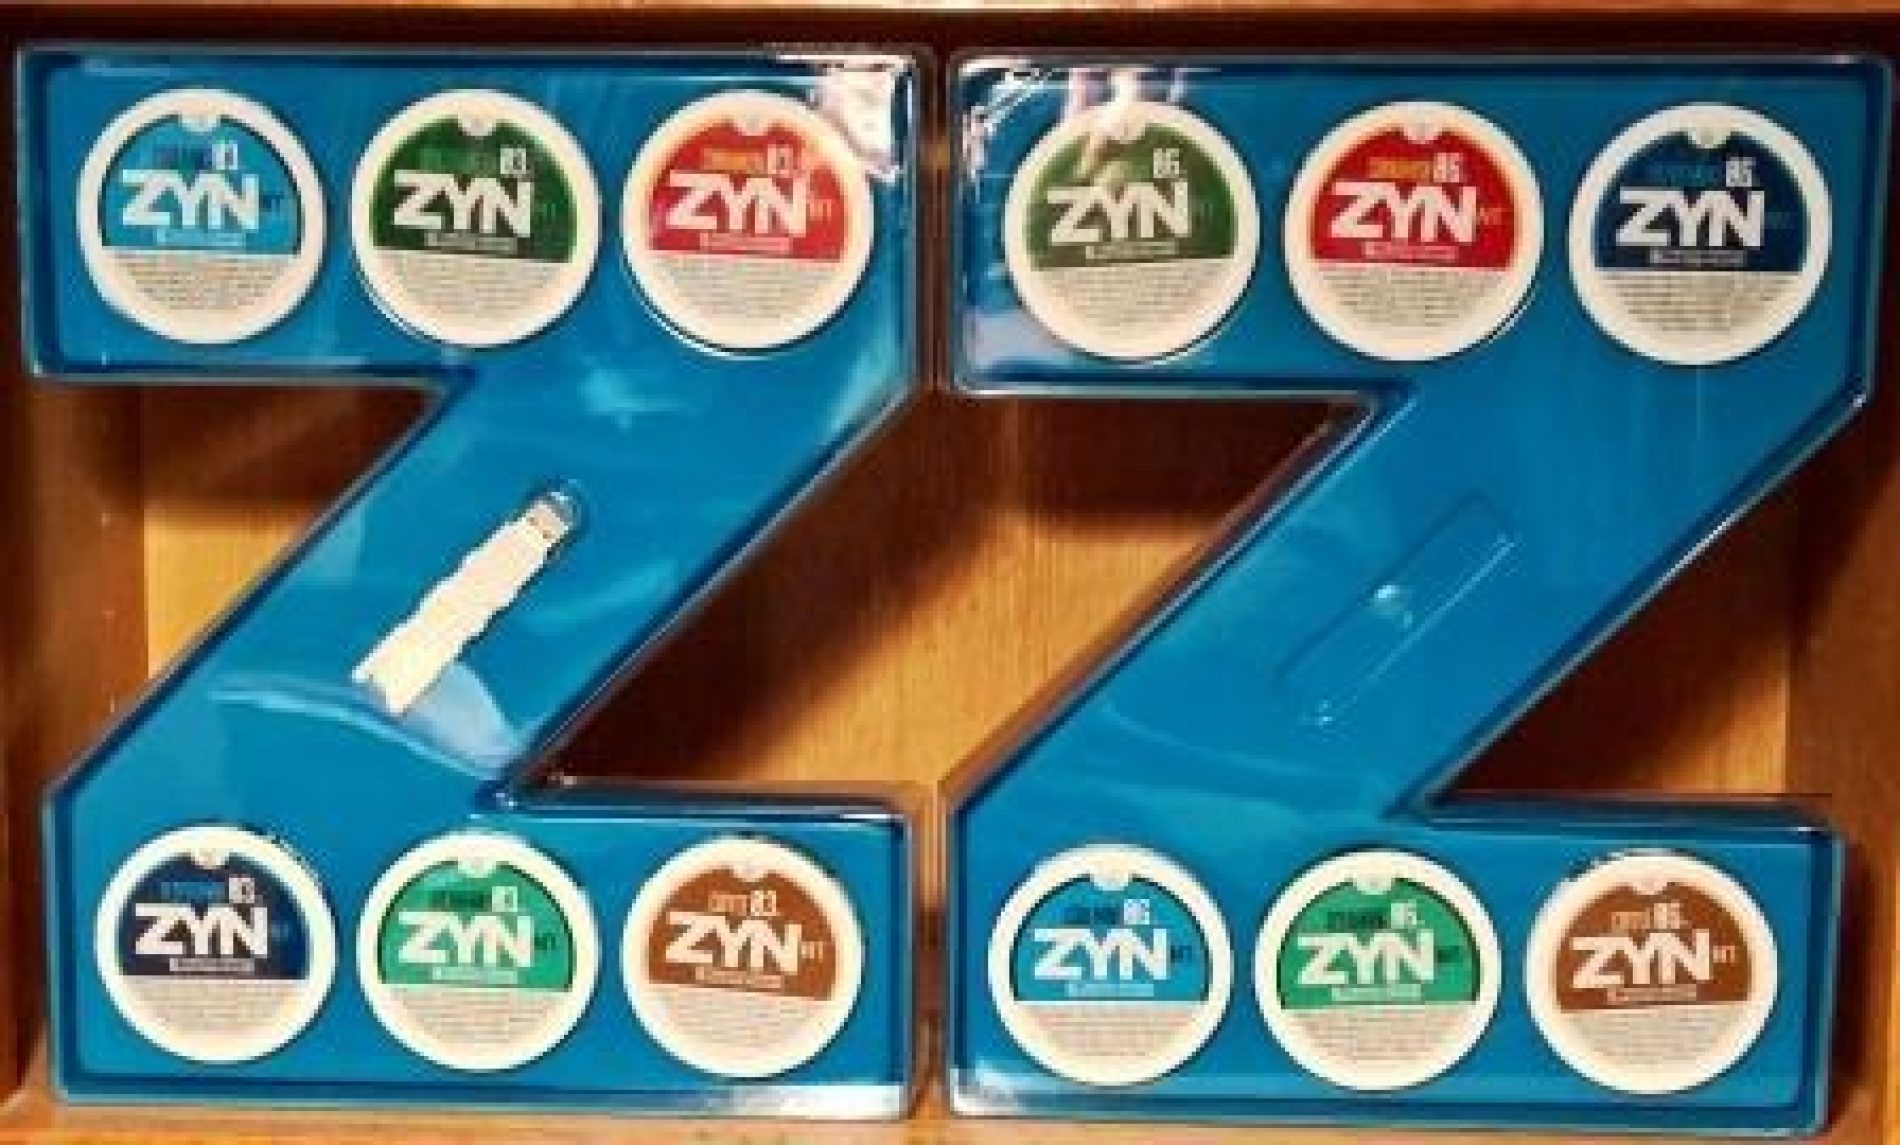 US distribution of mystery product ZYN nt Tobacco-free Nicotine Pouches expands